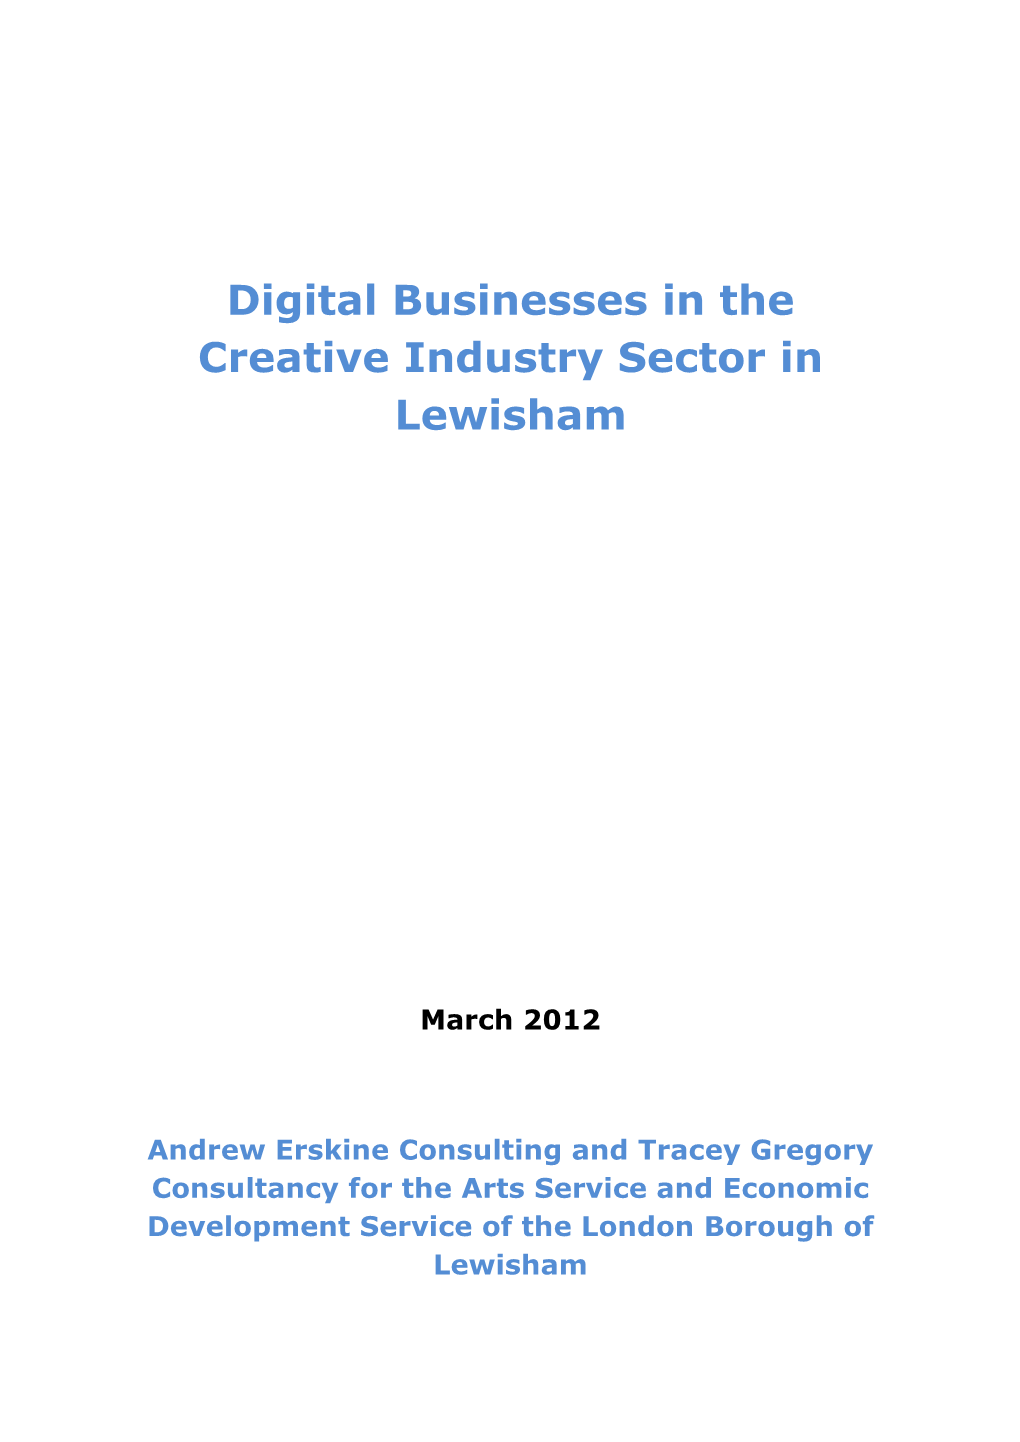 Digital Businesses in the Creative Industry Sector in Lewisham